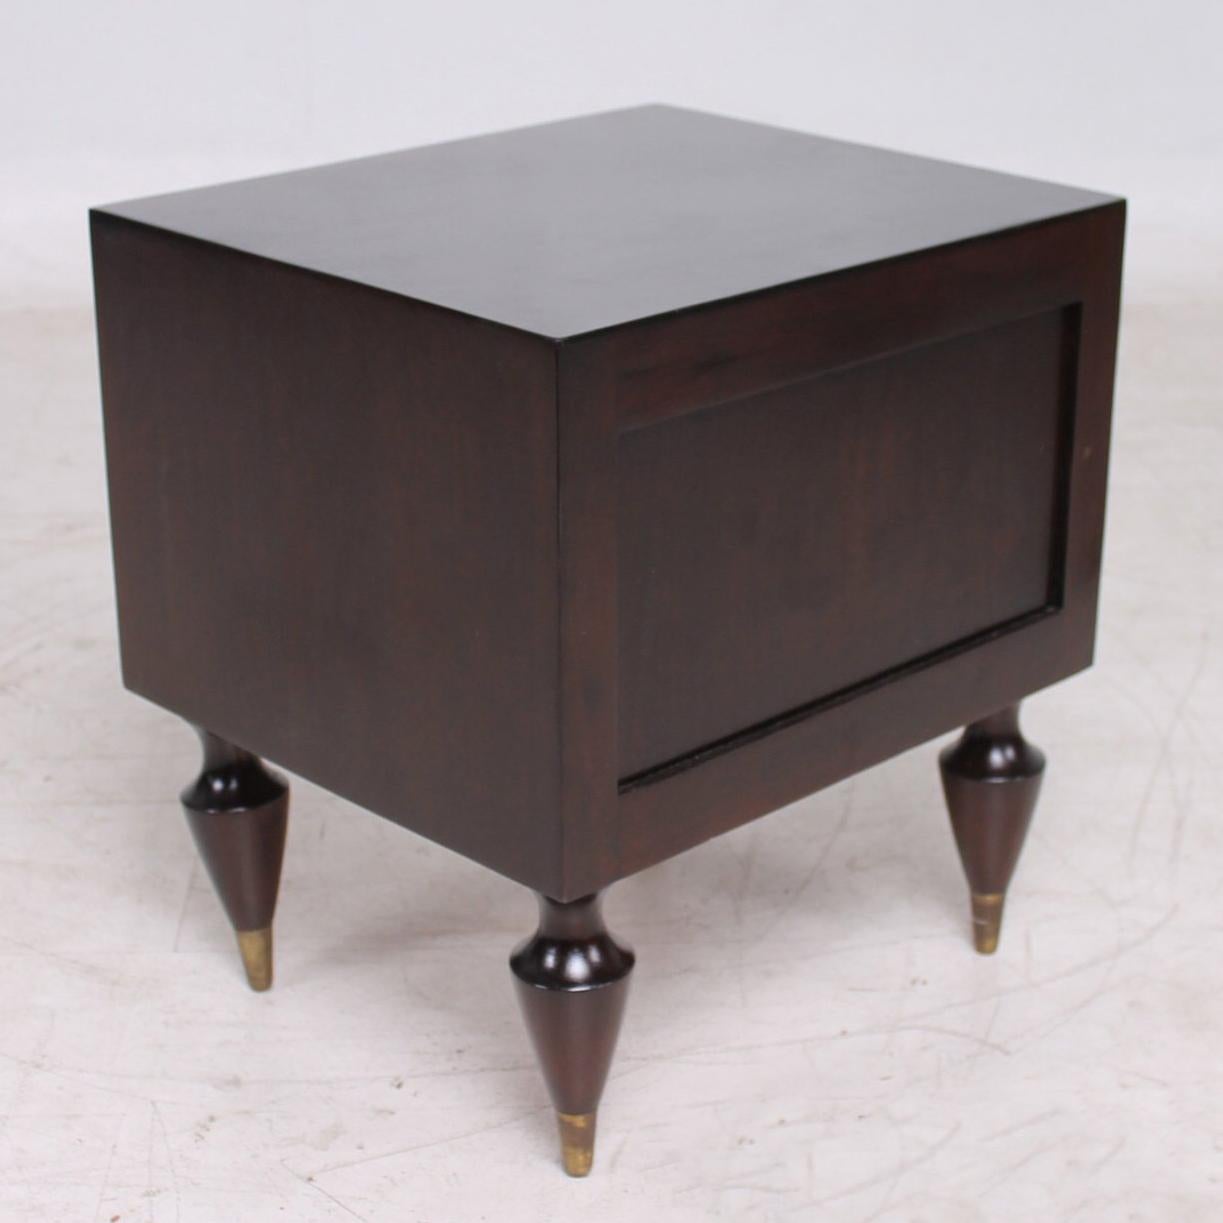 Mid-20th Century Fine Mexican Modernism Mahogany & Brass Nightstands Exceptional Legs by Escudero